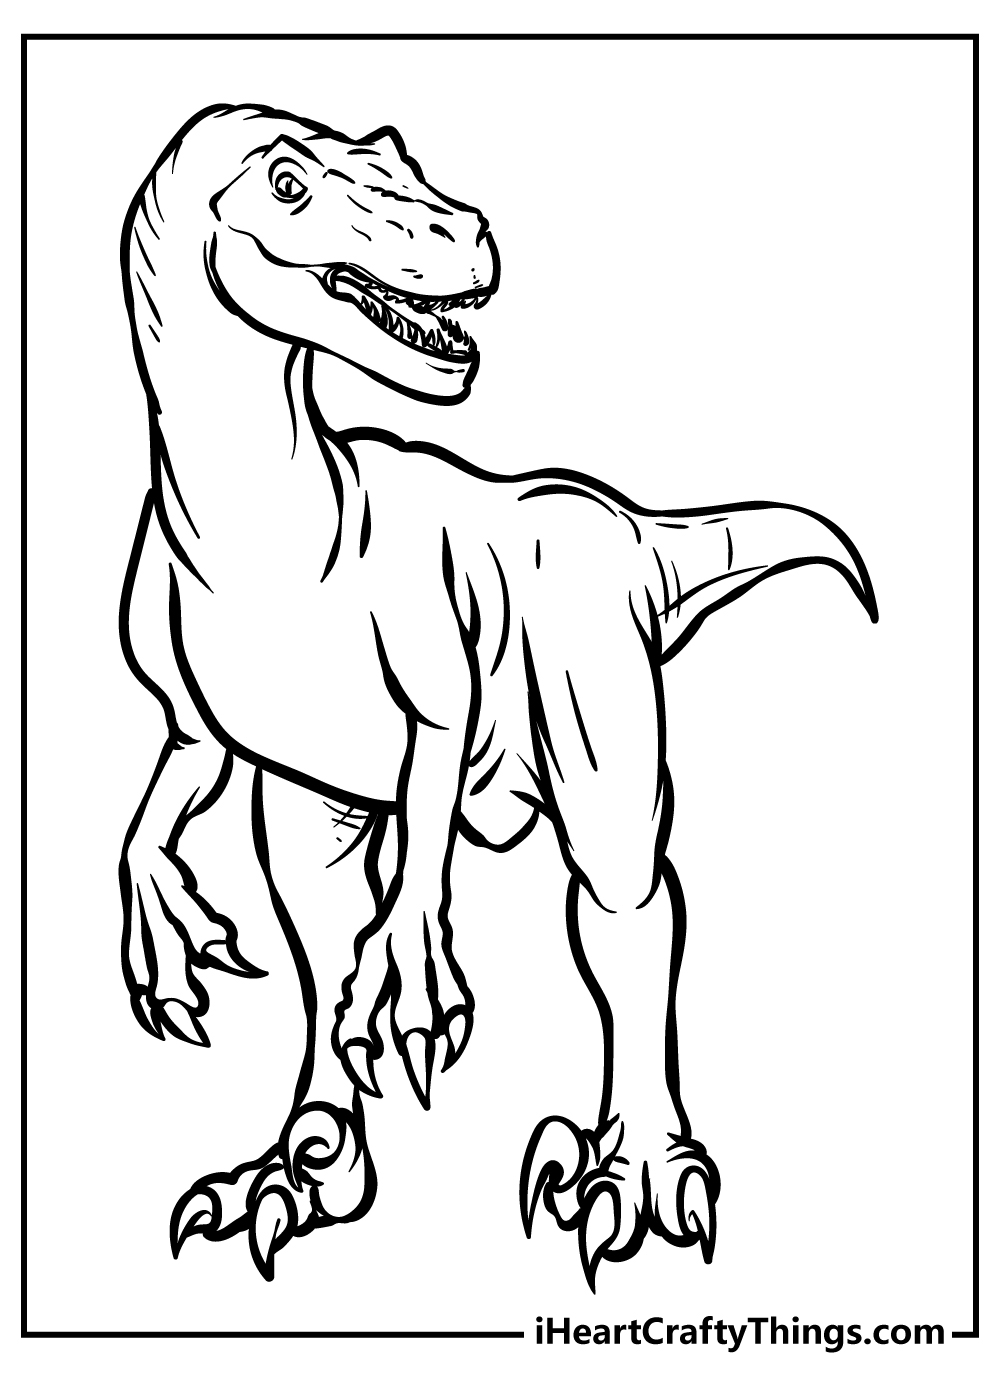 Jurassic world coloring pages free printables